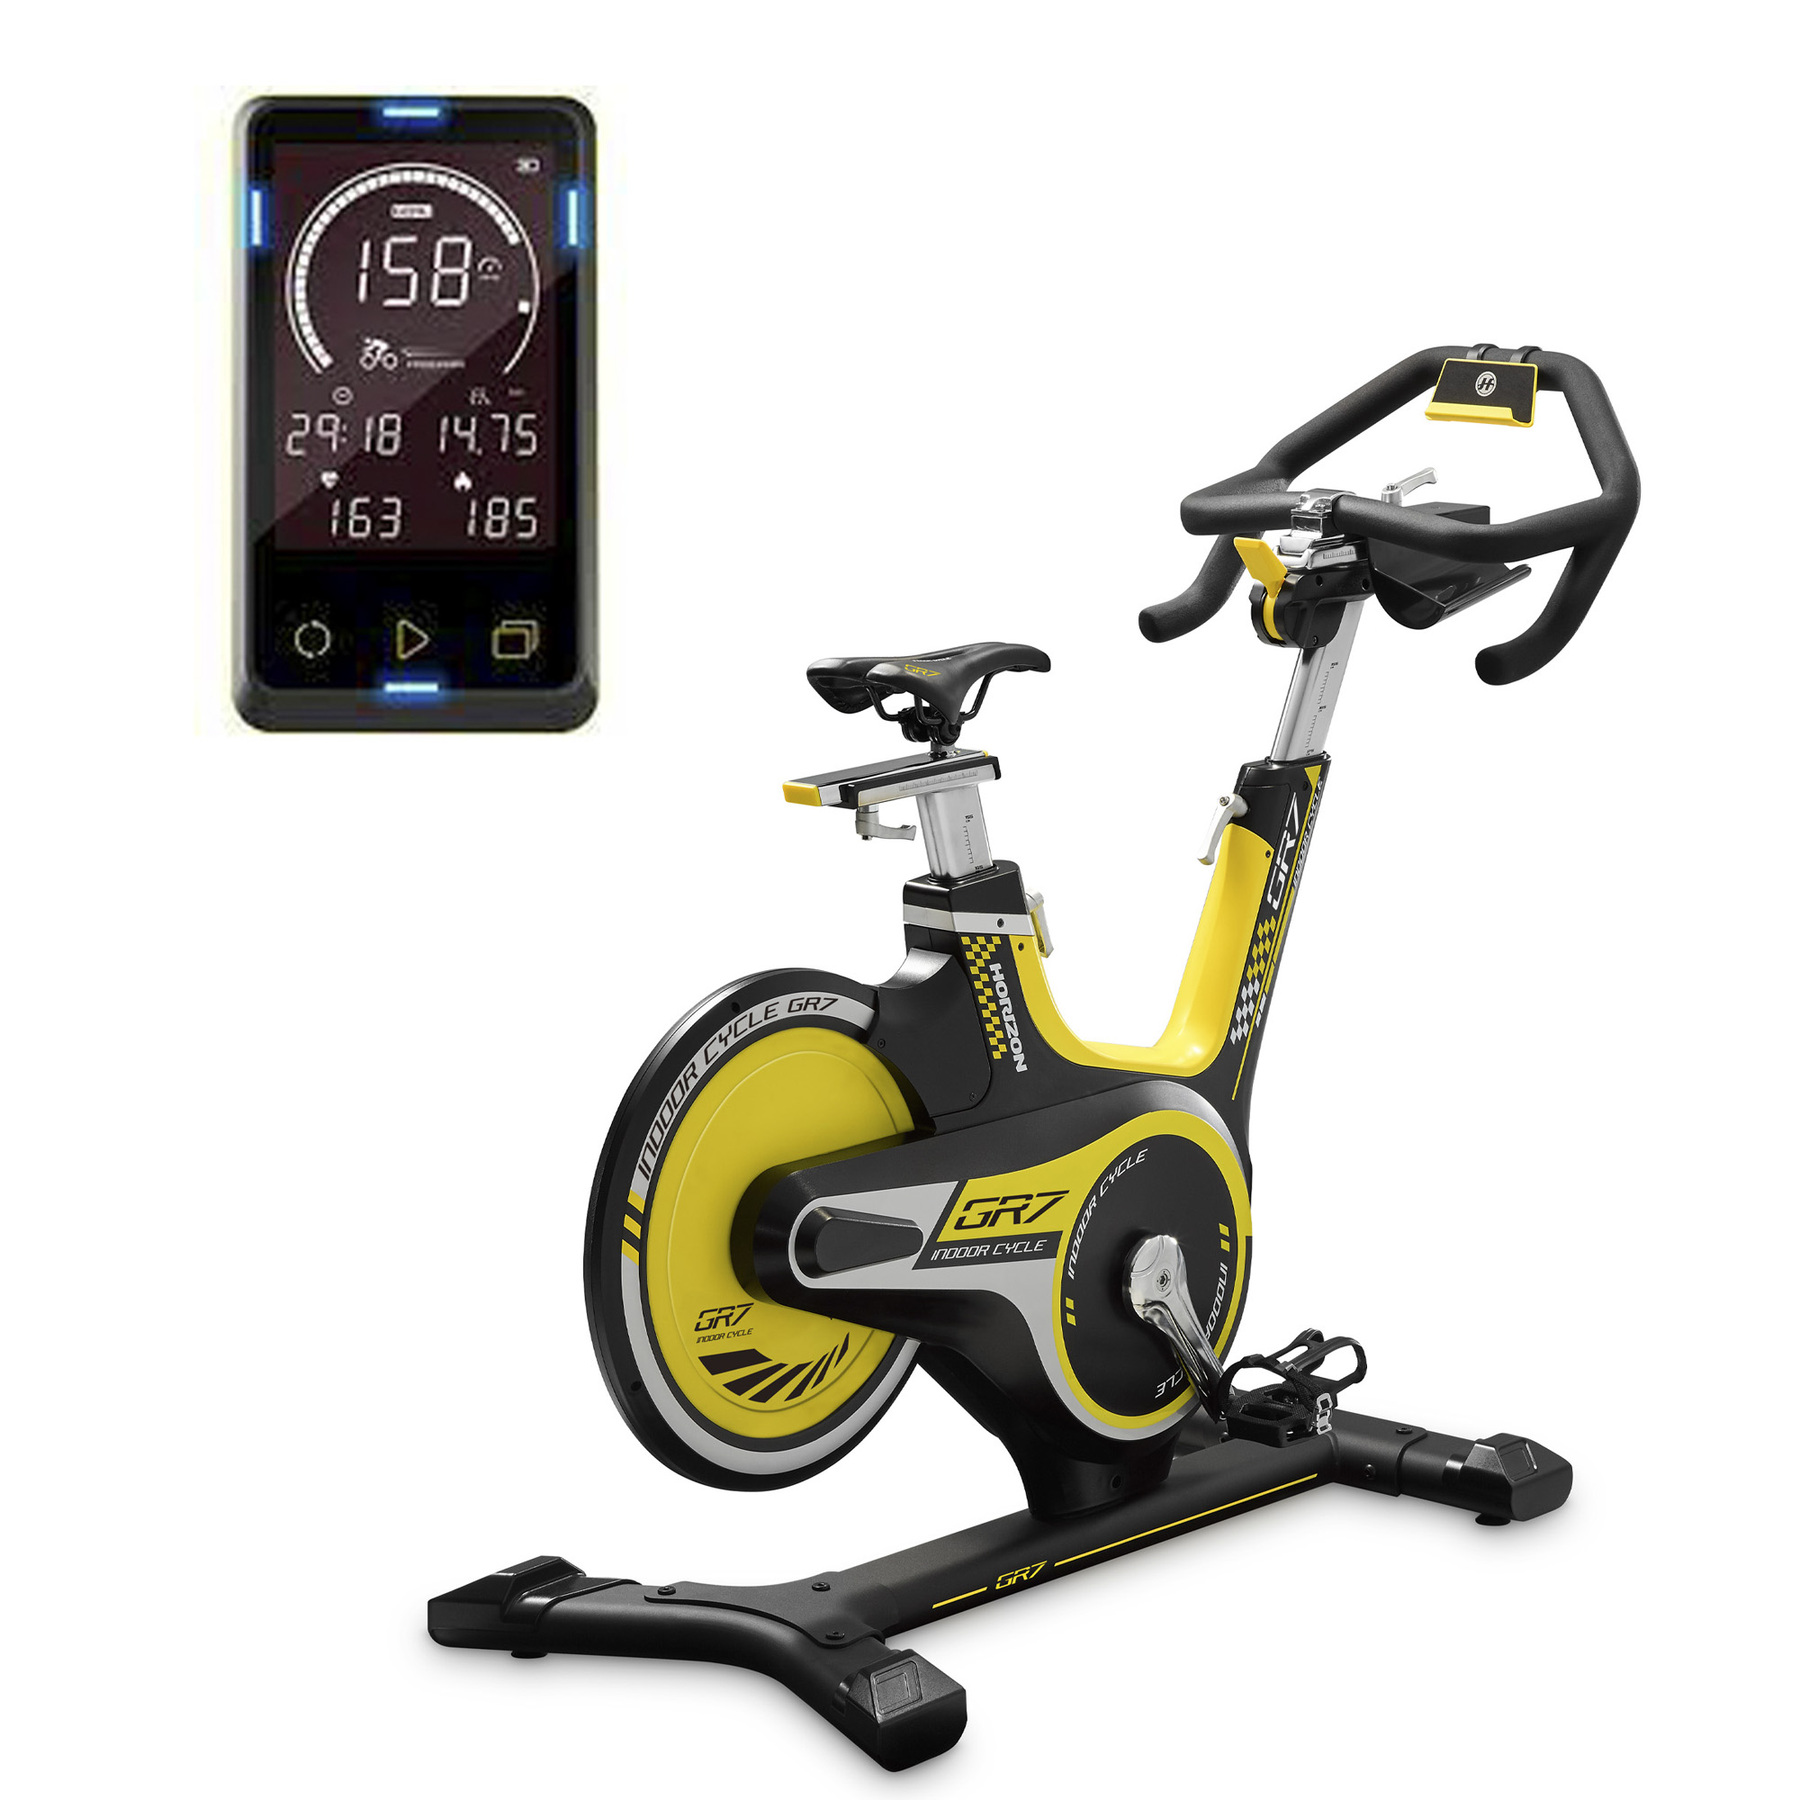 Horizon GR7 Spin Bike with Console